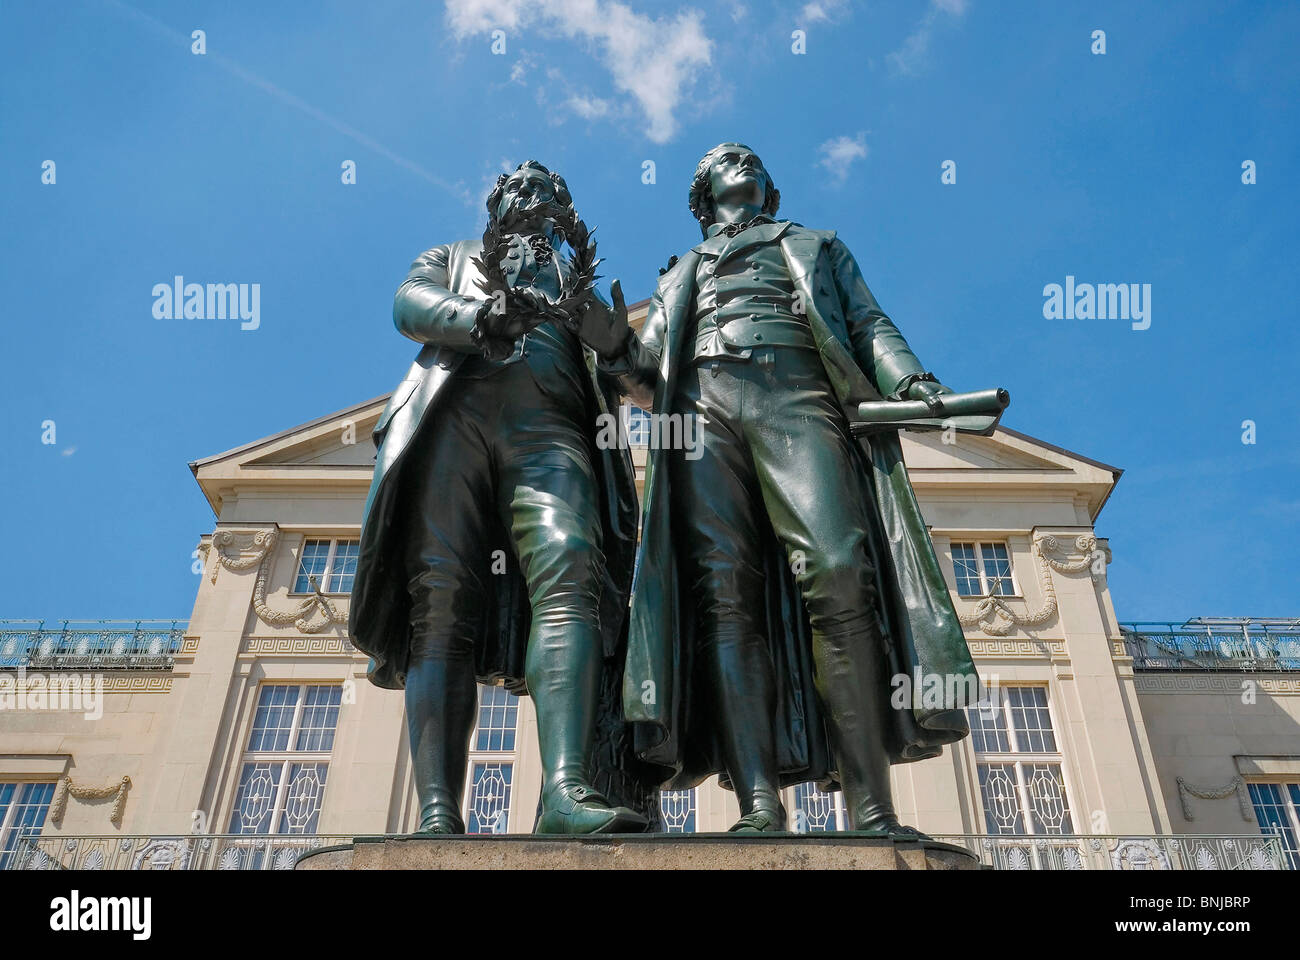 Germany Thuringia Weimar UNESCO world cultural heritage national theater Goethe Schiller monument Johann Wolfgang von Goethe Stock Photo